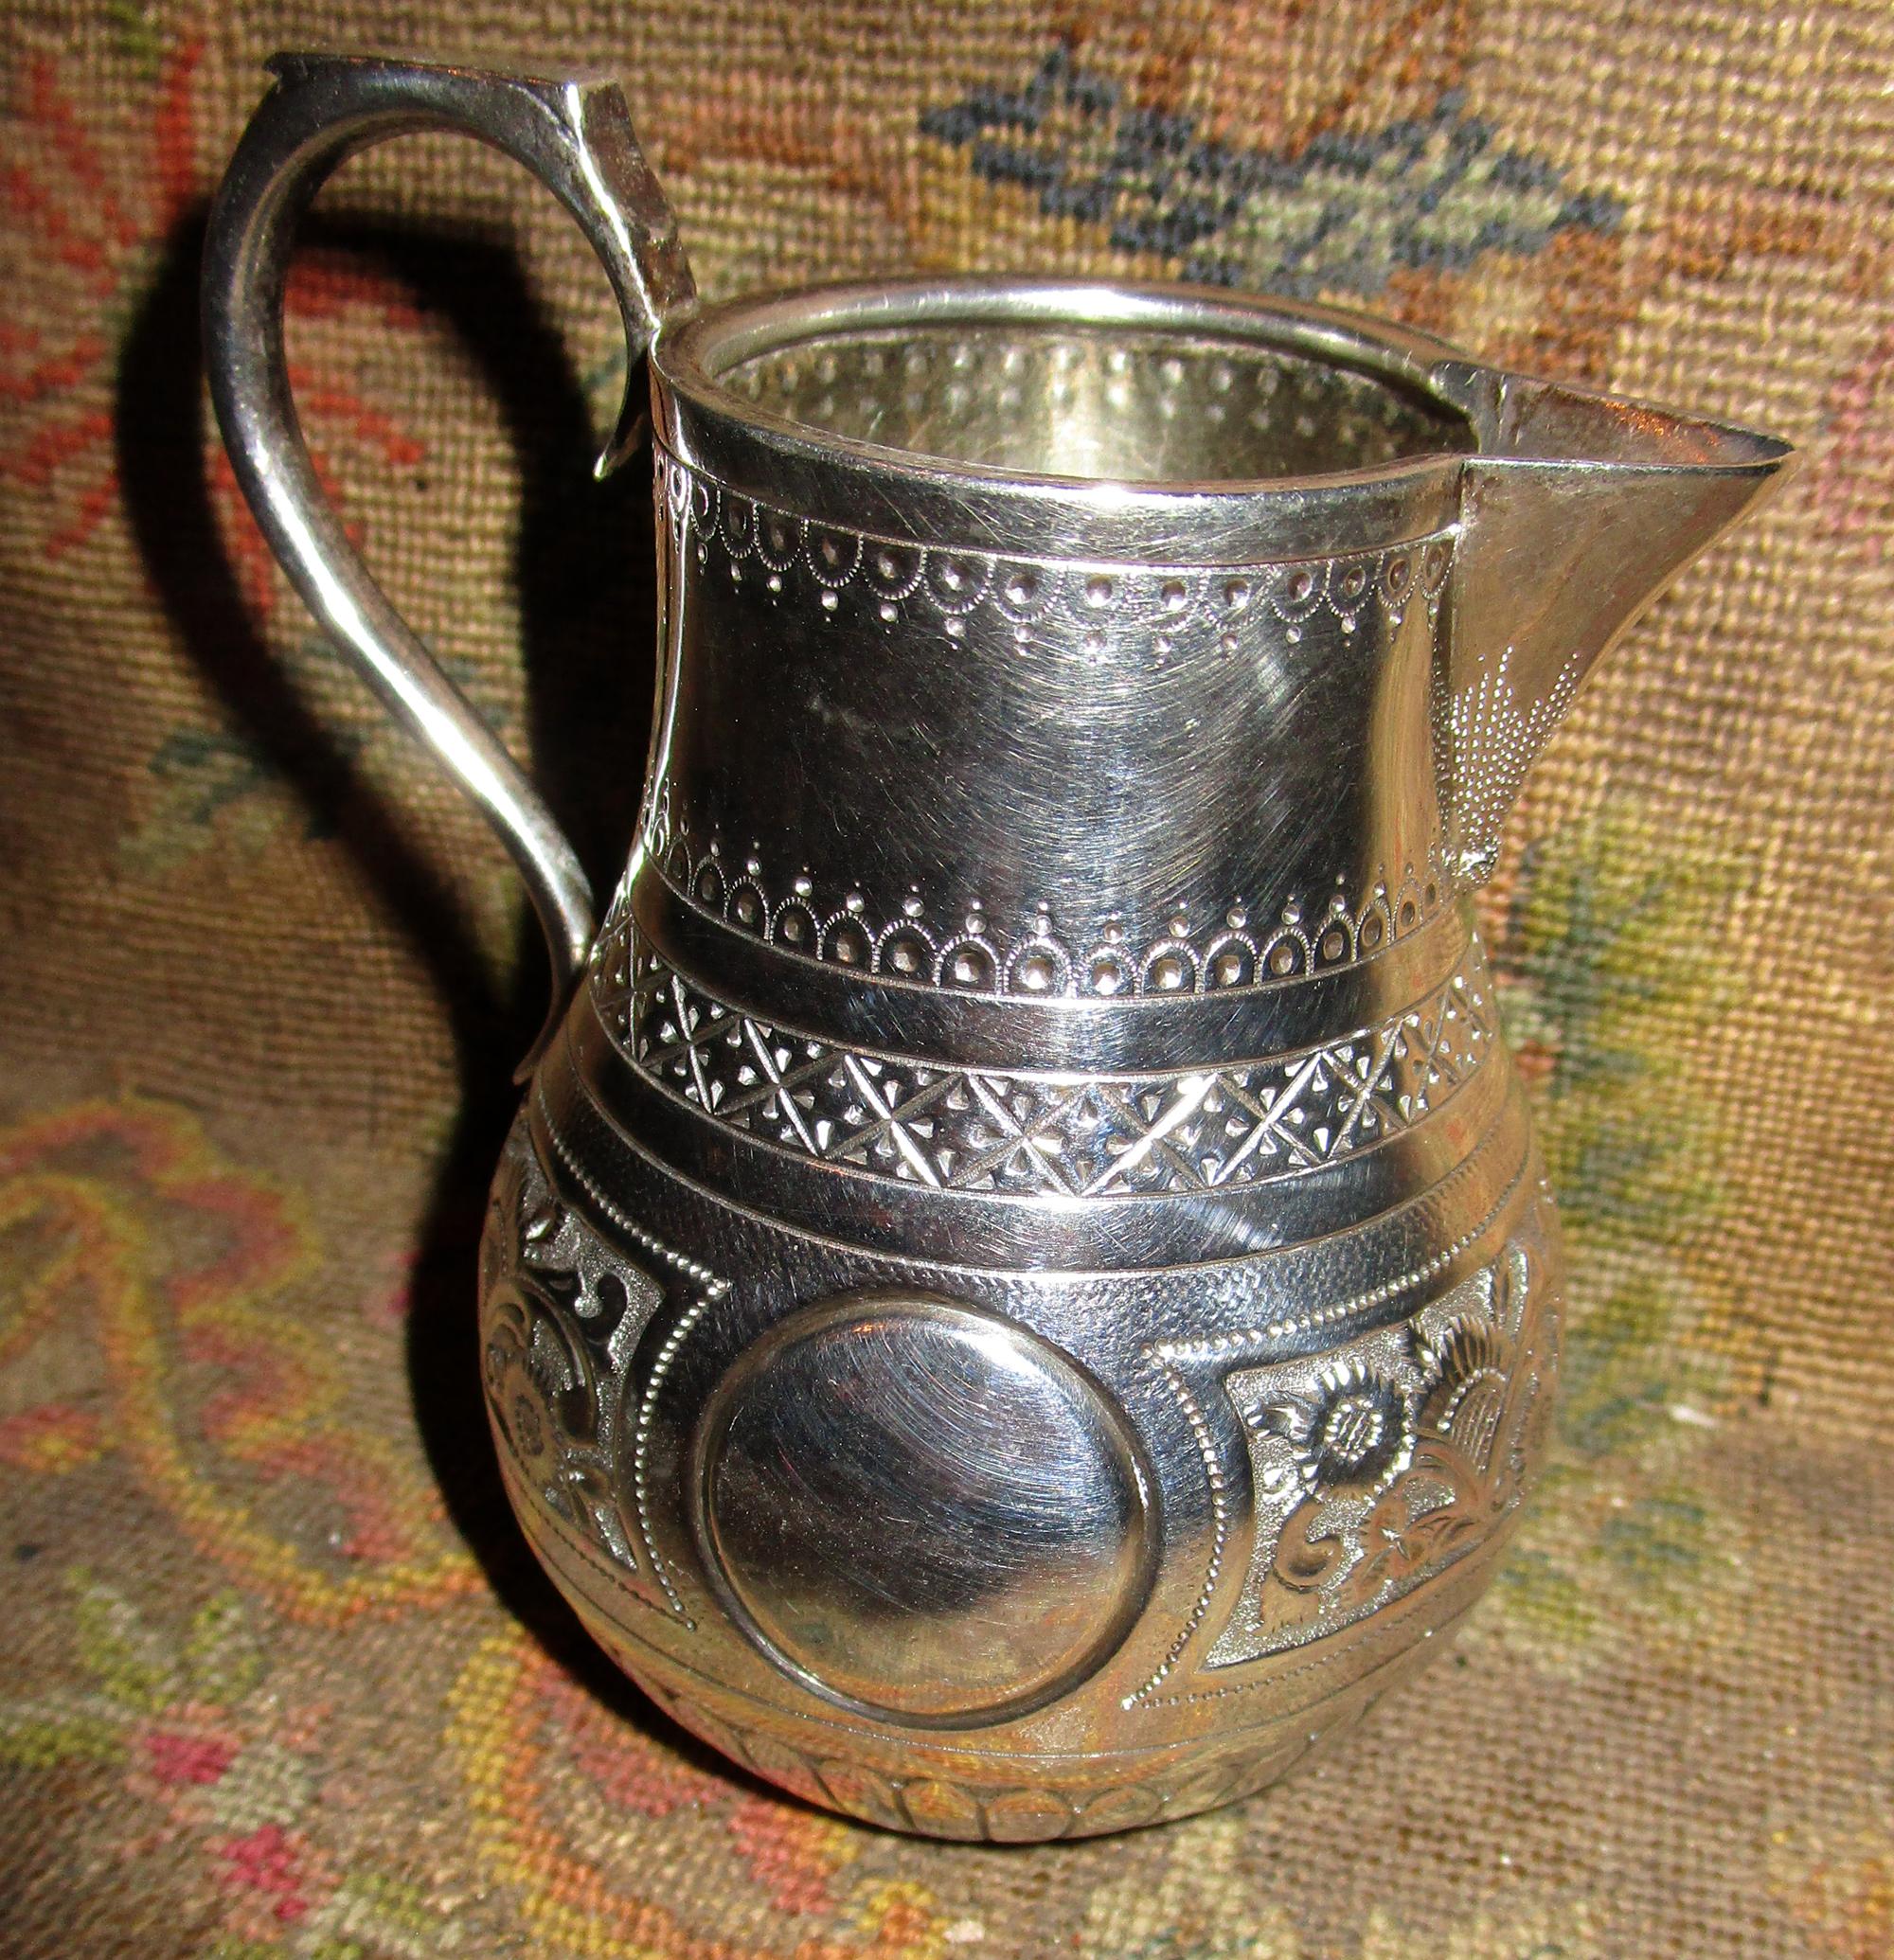 Late 19th Century 19th Century Sterling Silver Cream Pitcher by Charles Stuart Harris, London